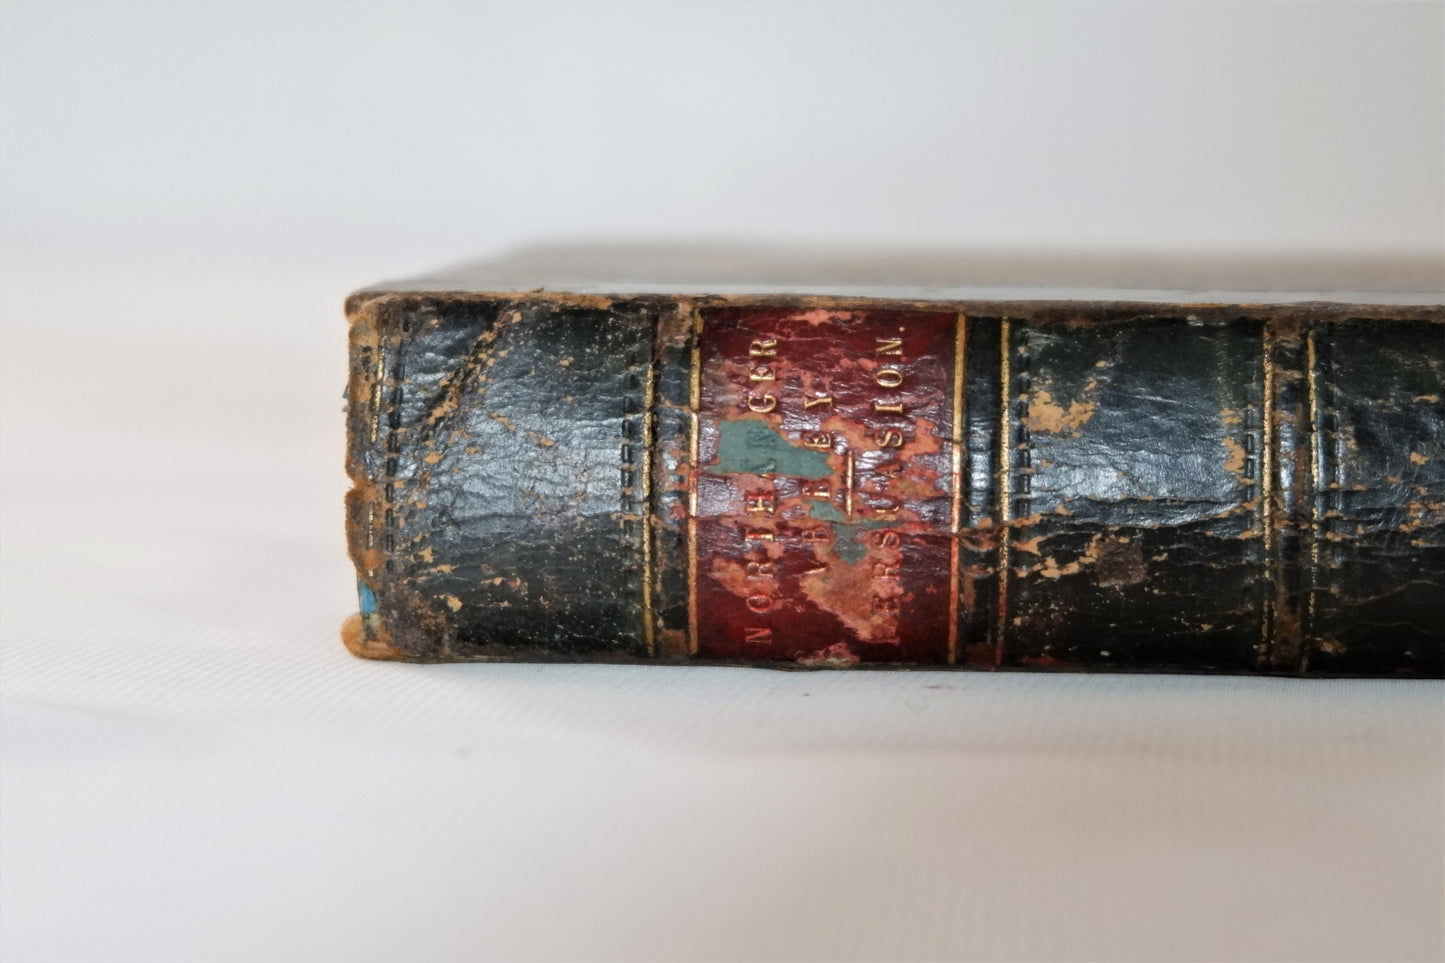 1837 Northanger Abbey & Persuasion by Jane Austen / Richard Bentley, London / Scarce Early Edition / Only the 2nd UK Publication of Her Work